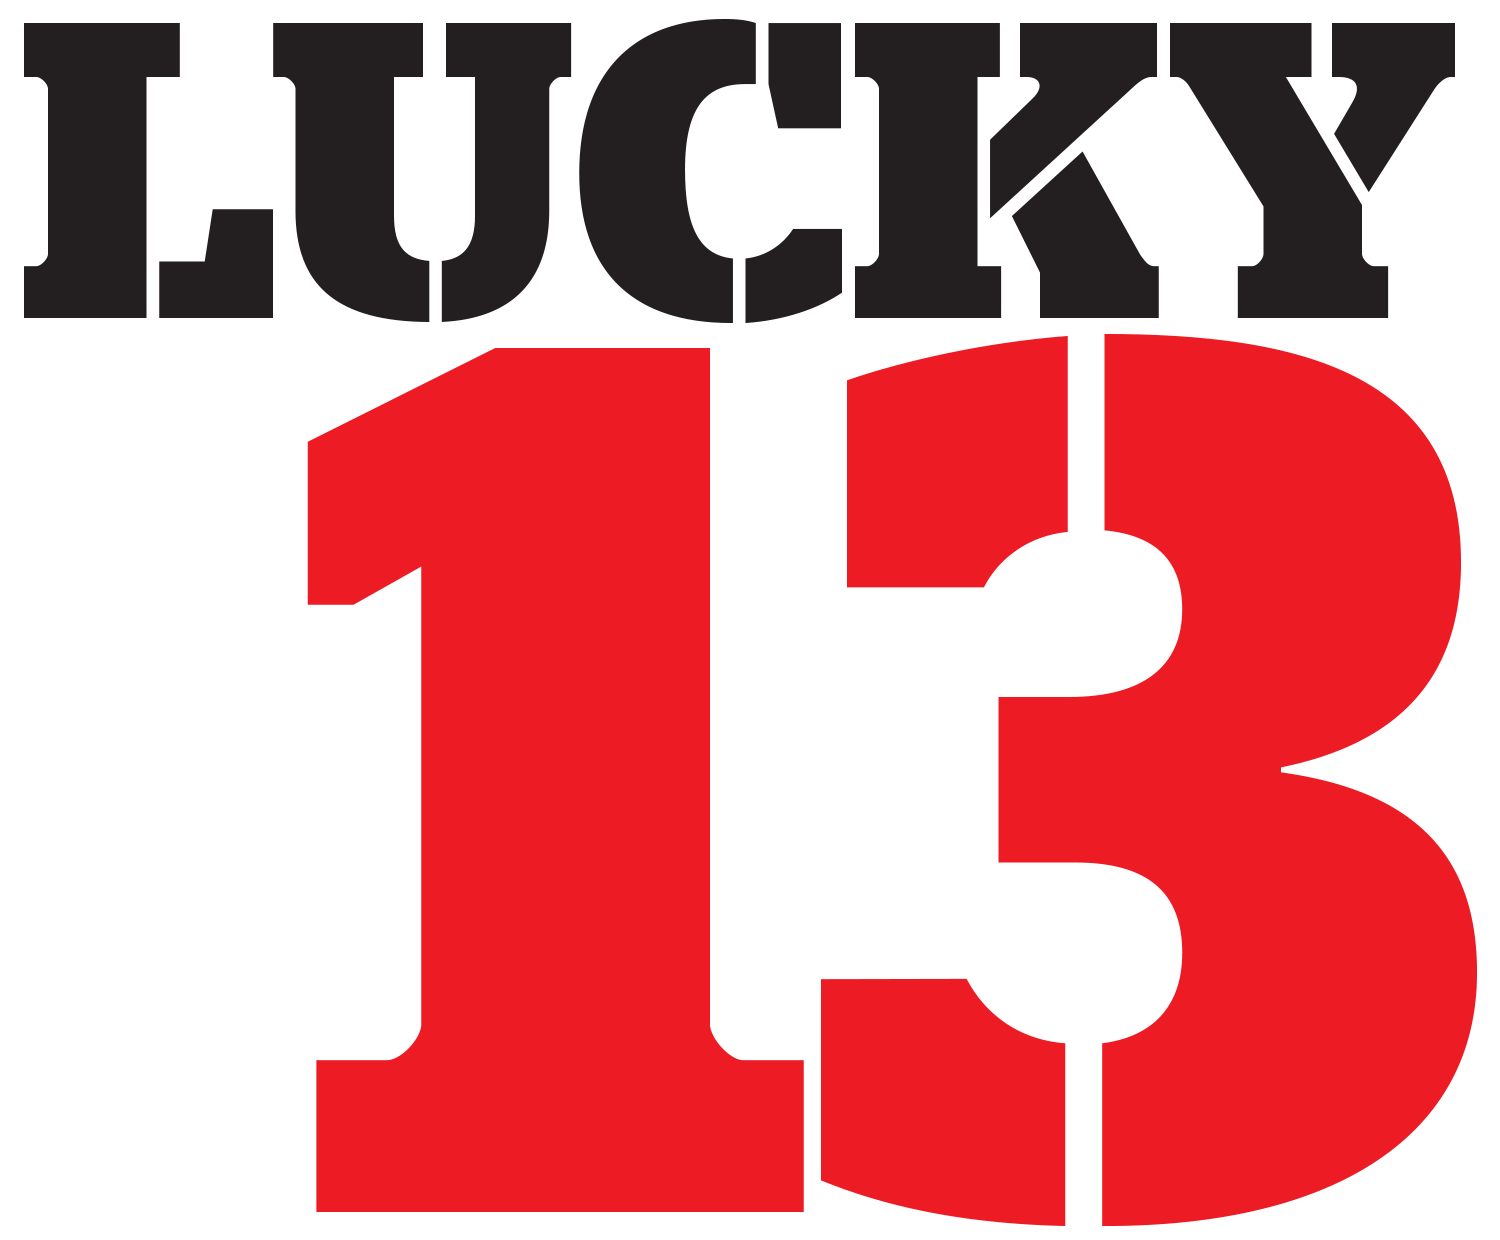 "Lucky 13" typographic title (word Lucky is in black and number 13 is in red)